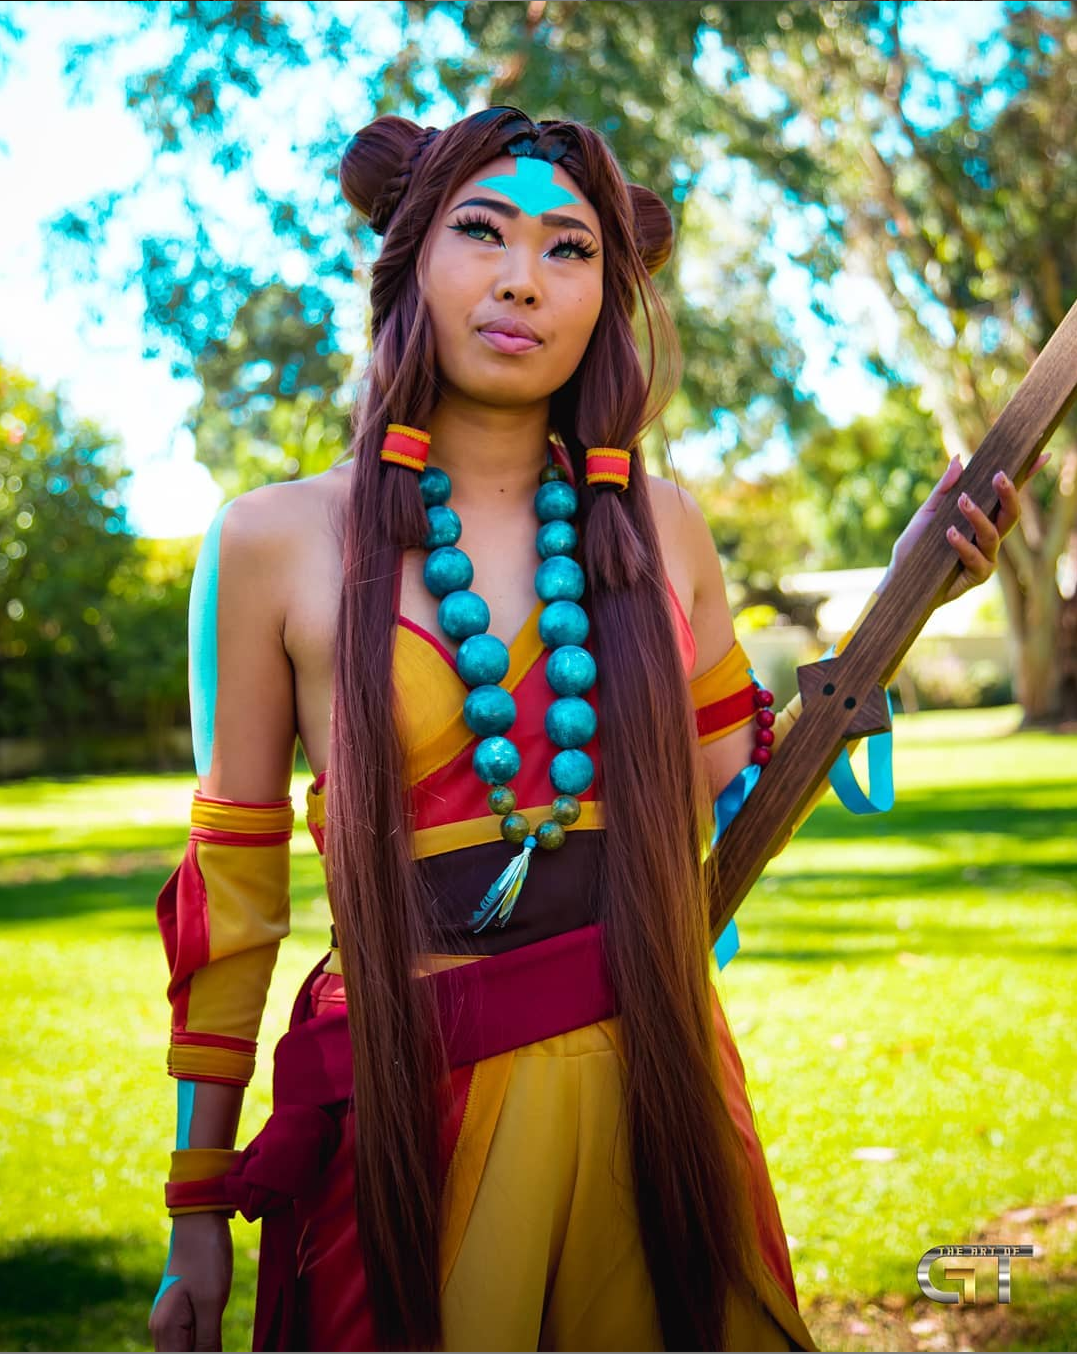 Rainy stay rifle Cosplay Collection: 'Avatar The Last Airbender' - Project-Nerd